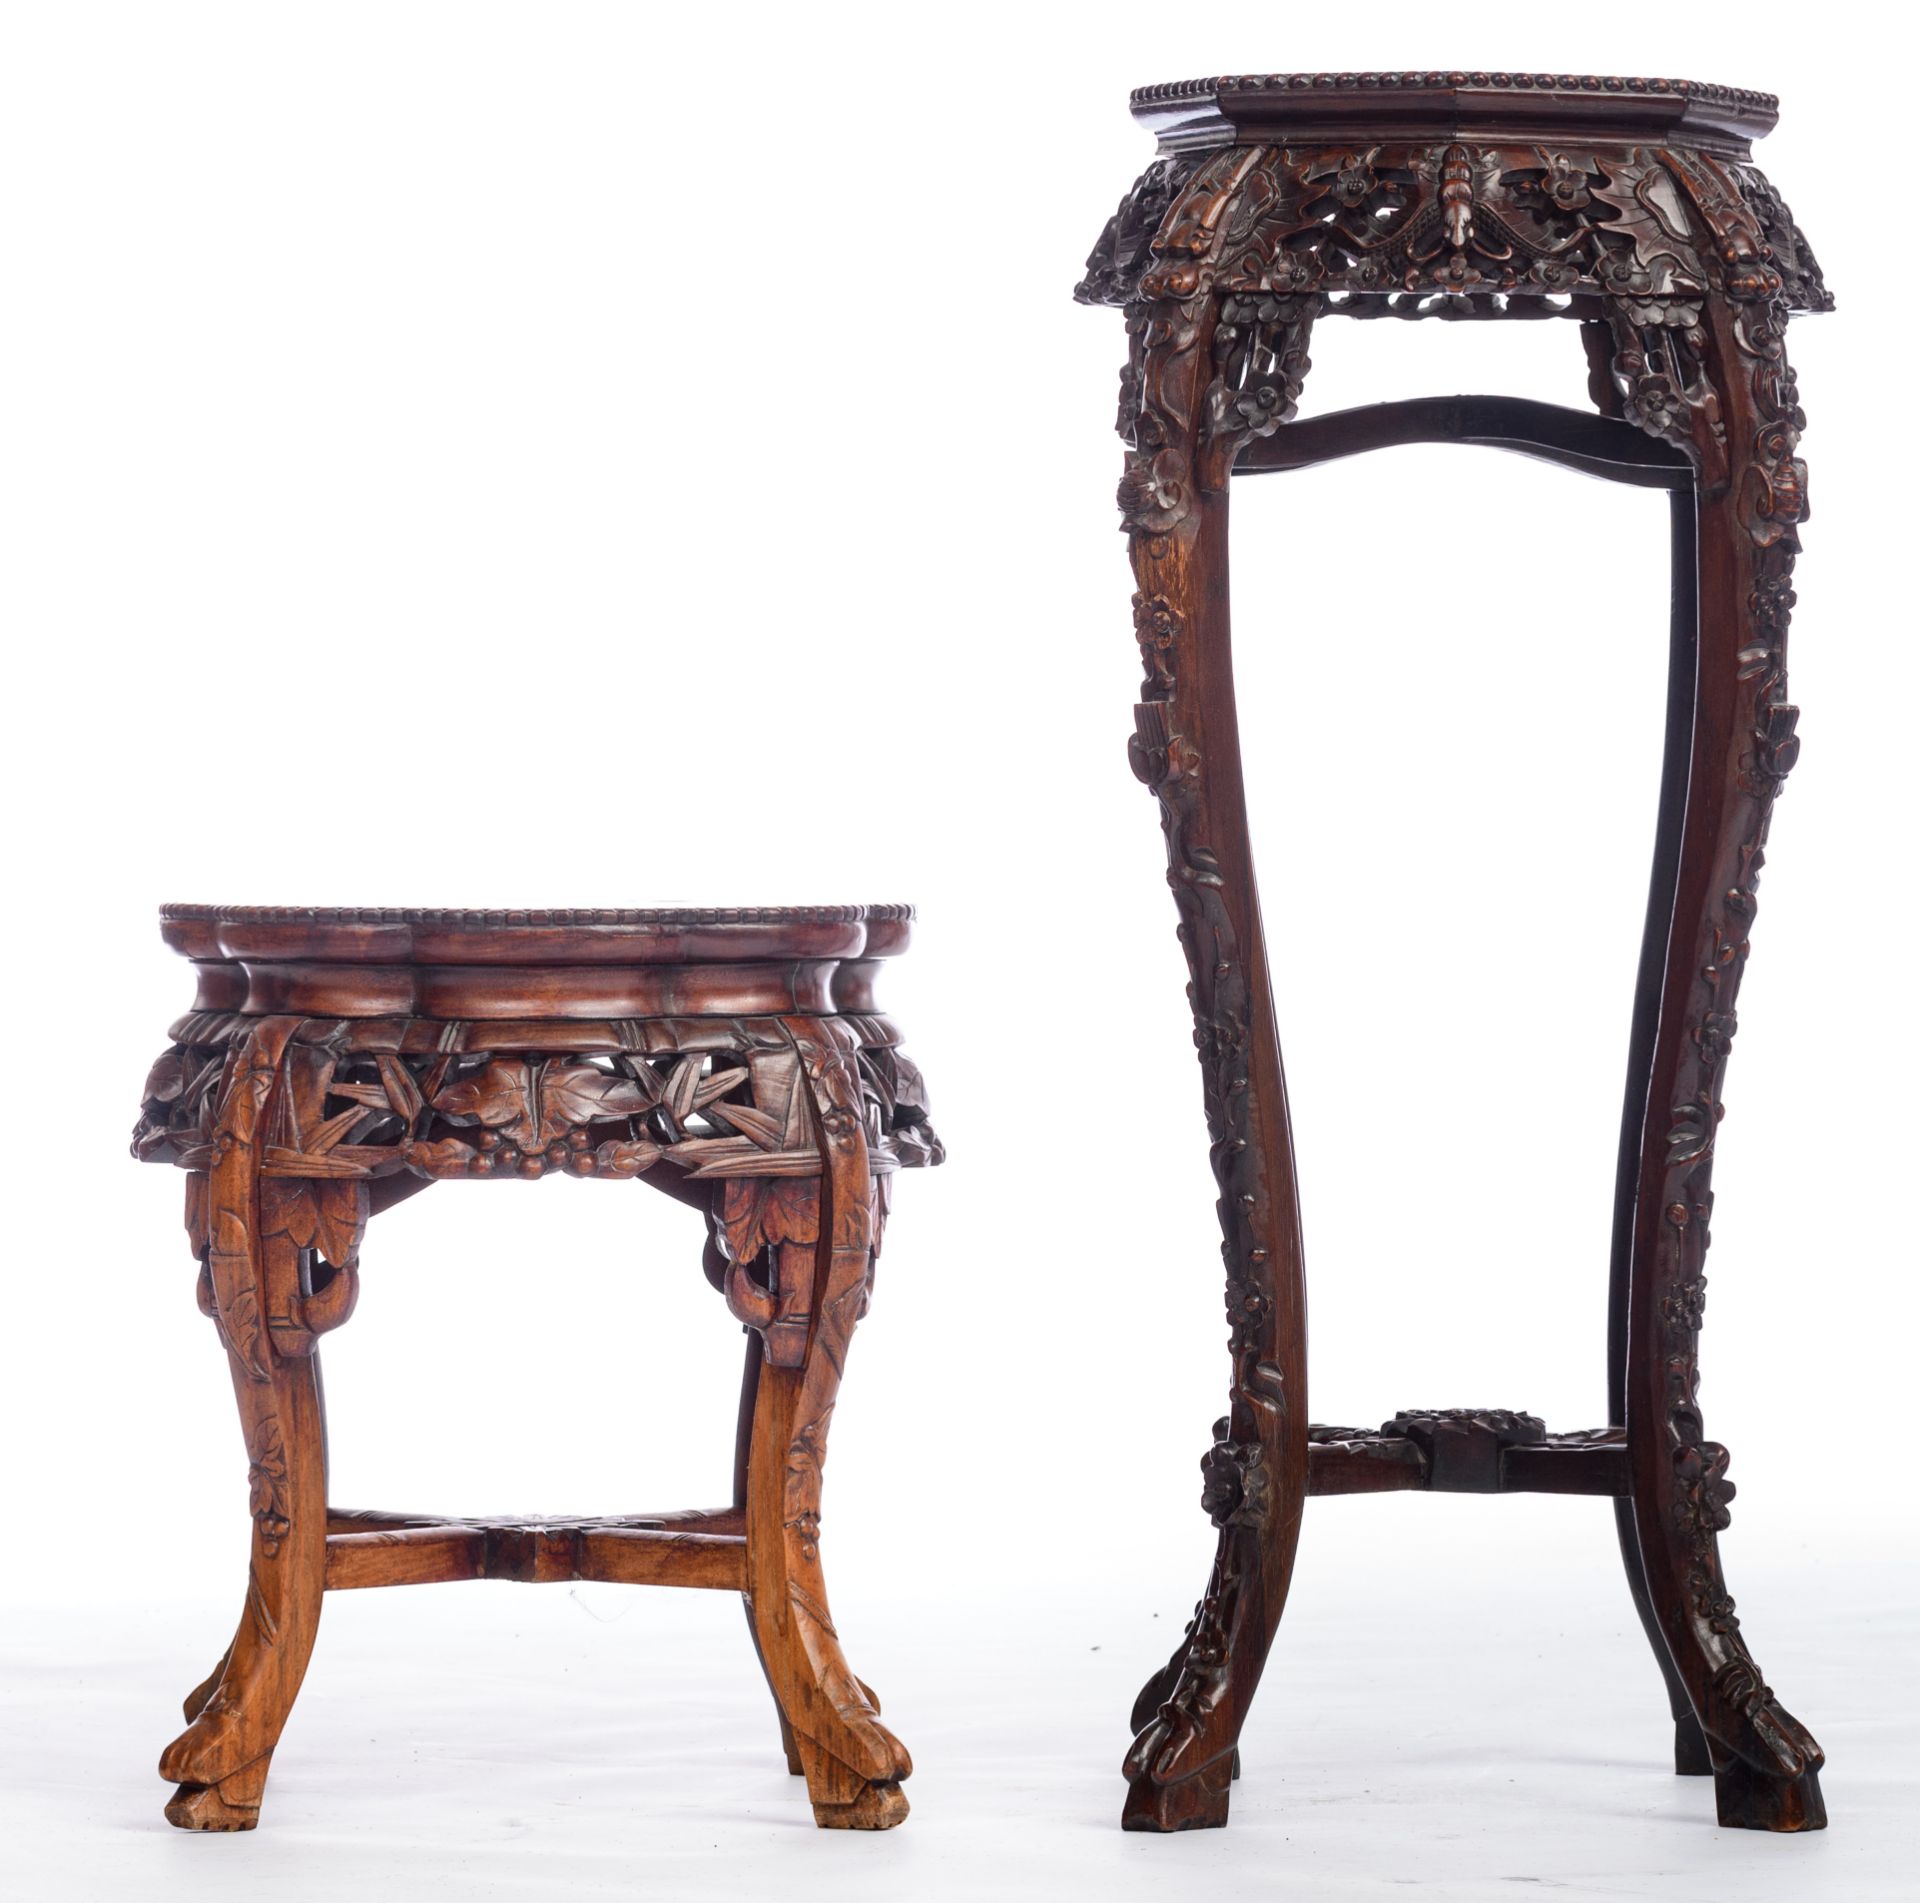 Two Chinese richly carved exotic hardwood stands, H 48 - 91 - W 40 - 42 cm - Image 5 of 7